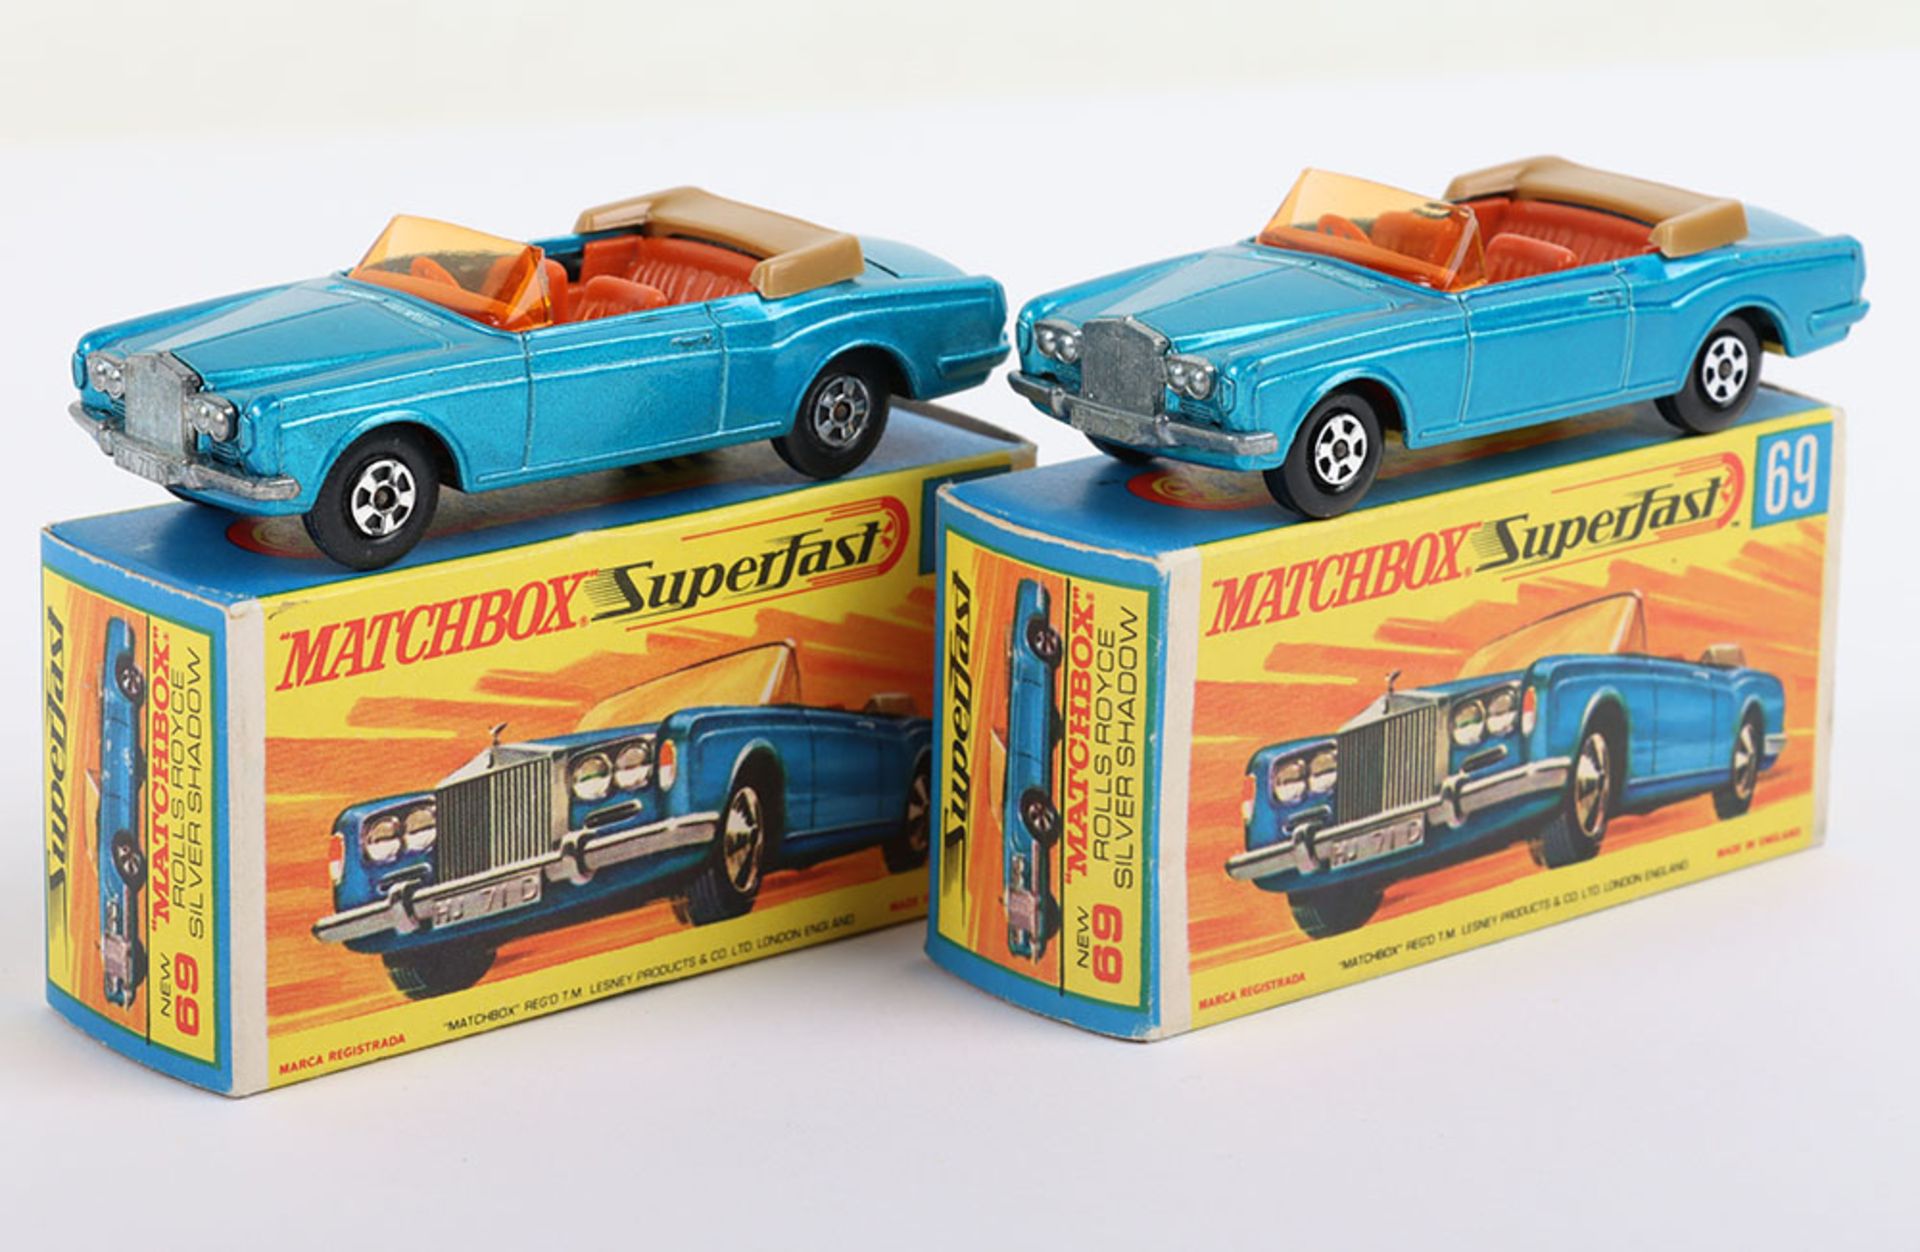 Two Boxed Matchbox Lesney Superfast 69c Rolls Royce Silver Shadow Models